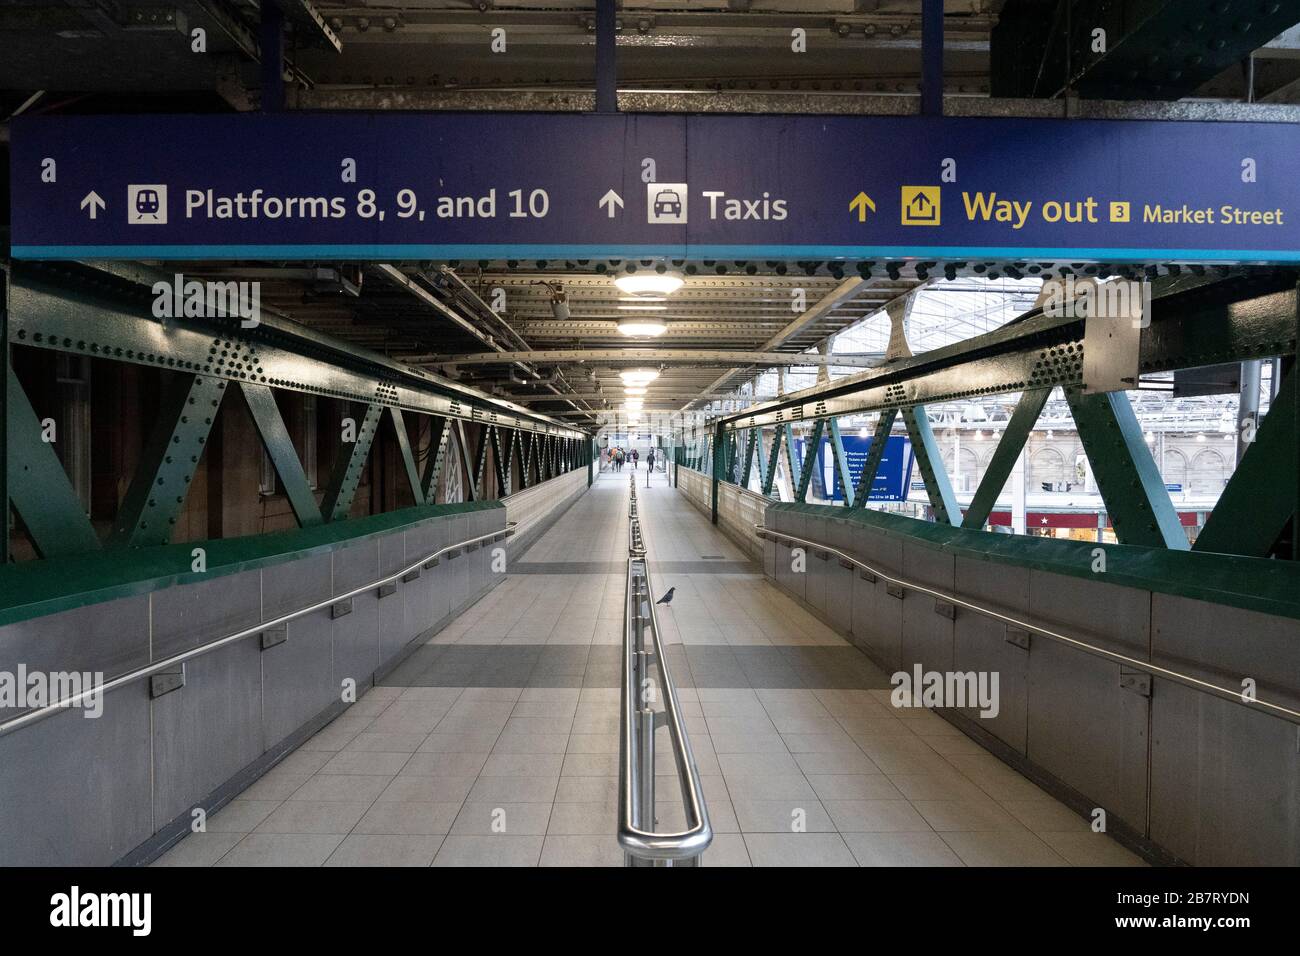 Edinburgh, Scotland, UK. 18 March 2020. Coronavirus scare obvious in an empty Waverley Station during the normally busy morning rush hour. Iain Masterton/Alamy Live News. Stock Photo